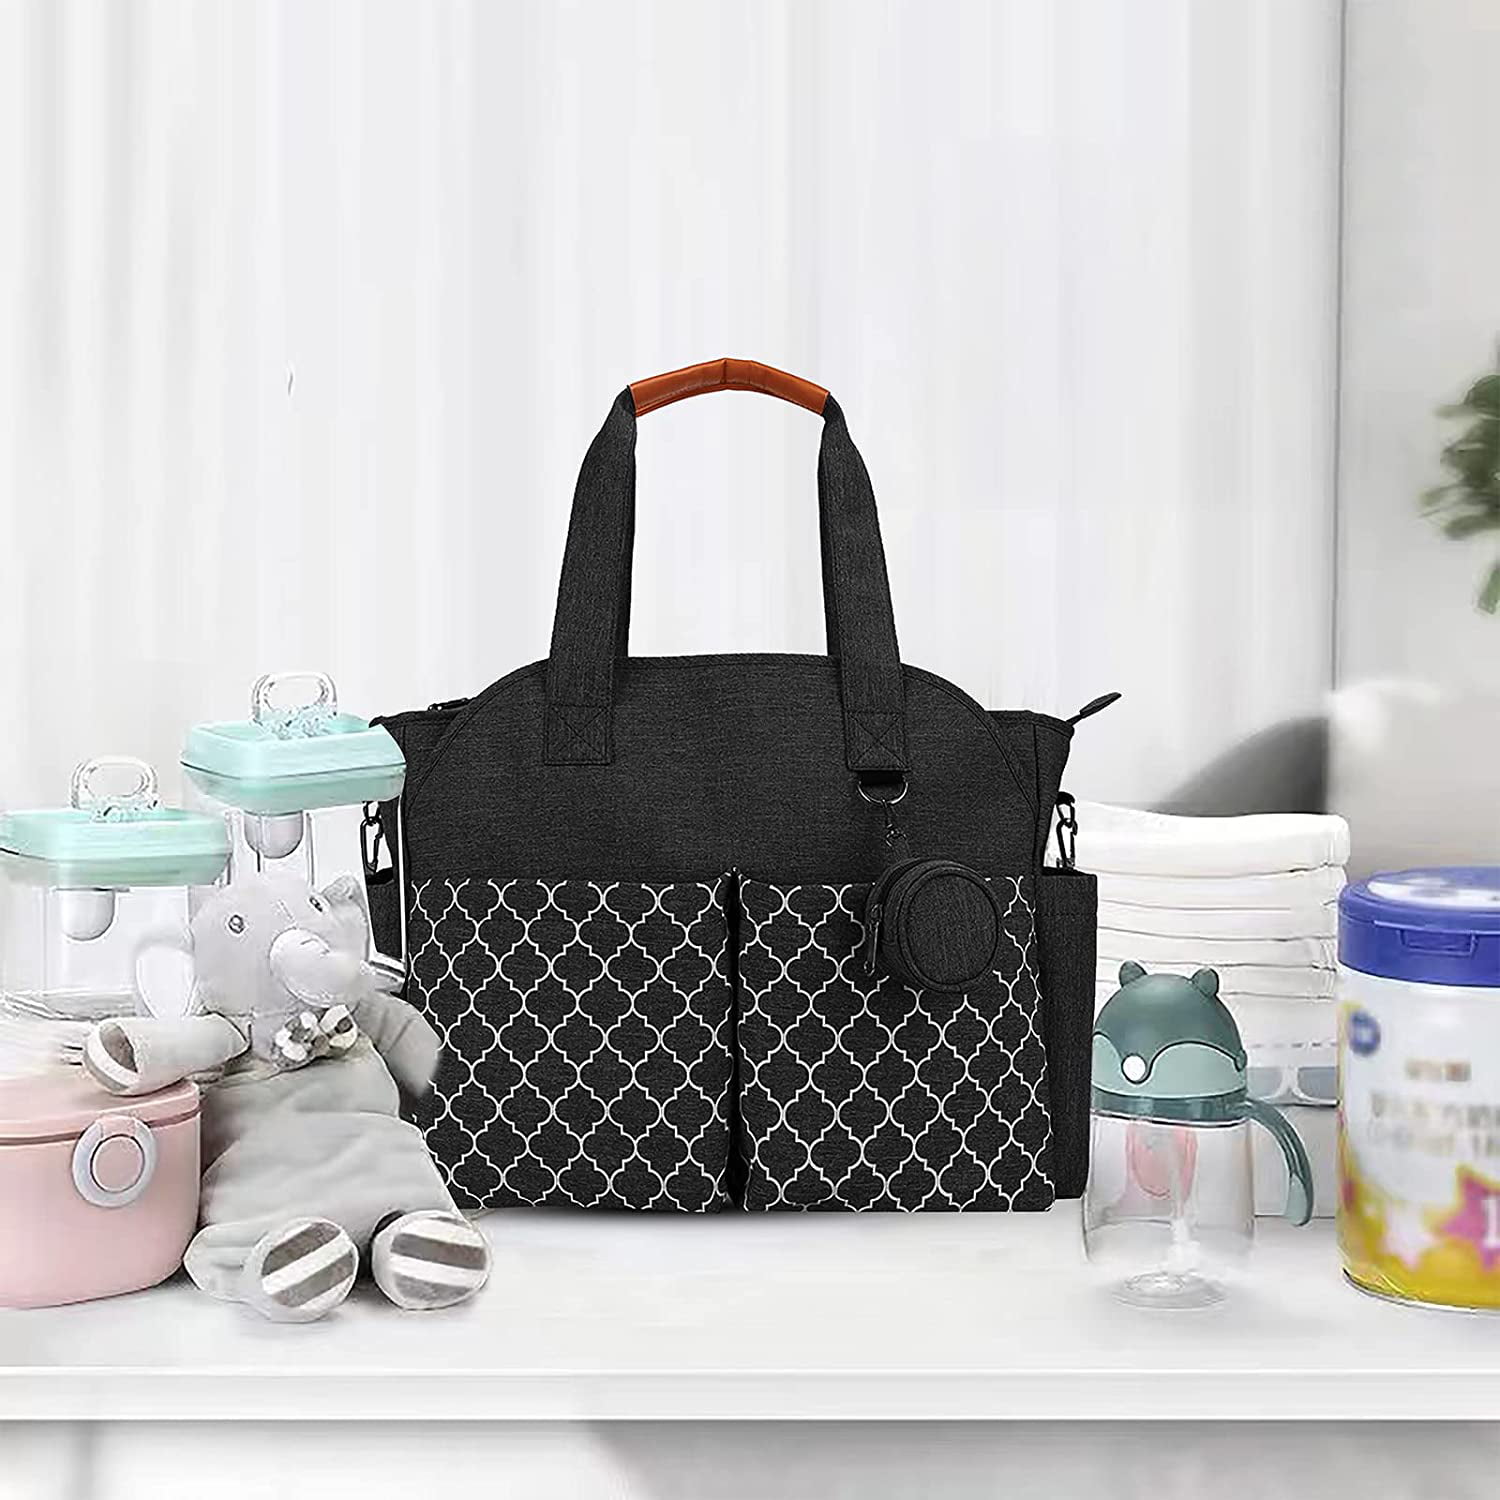  Momcozy Breast Pump Bag Diaper Bag Tote, Detachable Double  Layer, Separate Storage Area for Breast Pump, with Changing Pad and 3  Insulated Pockets, Multifunction Diaper Bag for Travel, Work : Baby